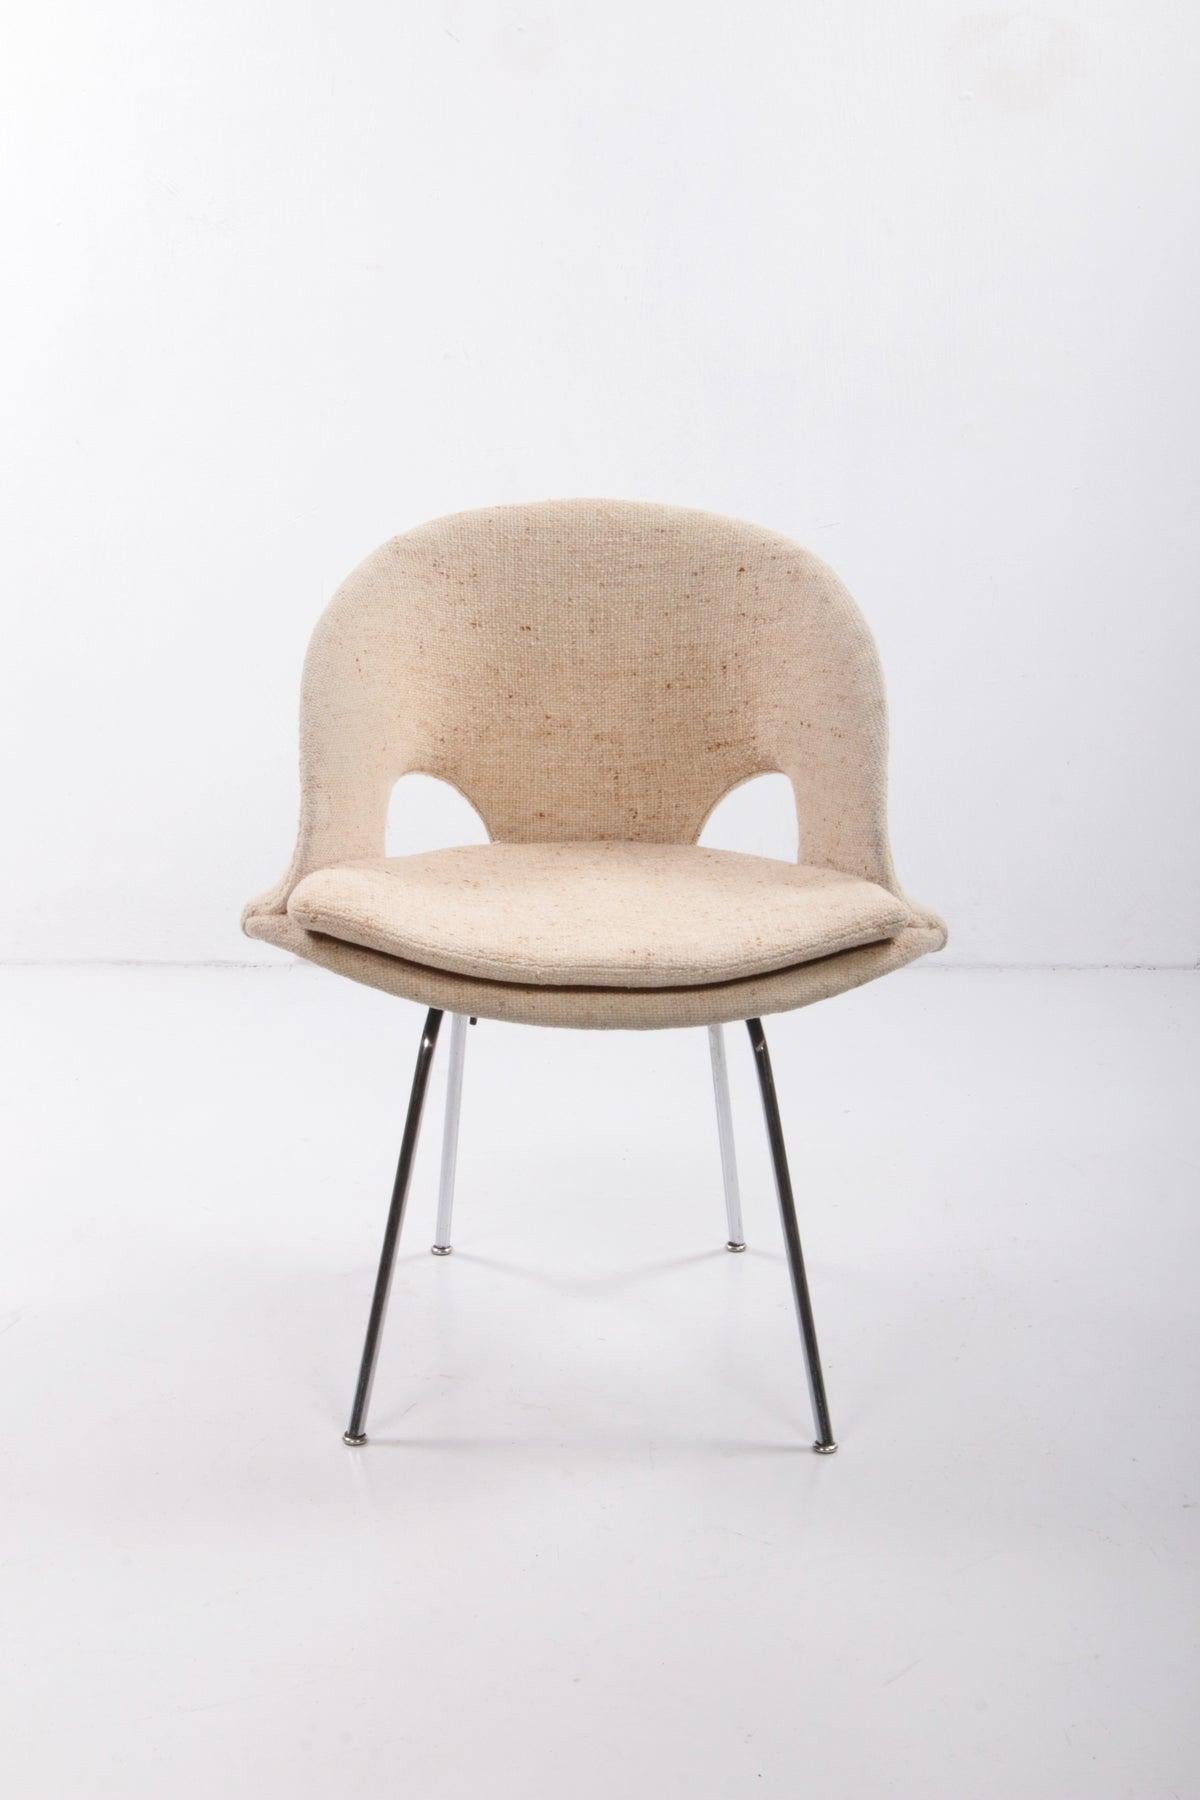 Walter Knoll Lounge Chair by Arno Votteler Model 350, 1950s
Walter Knoll

Inspired by the Bauhaus - founded in 1919 by Walter Gropius - Walter Knoll decided to focus heavily on modernism. He launched his eponymous German furniture maker in 1925 and